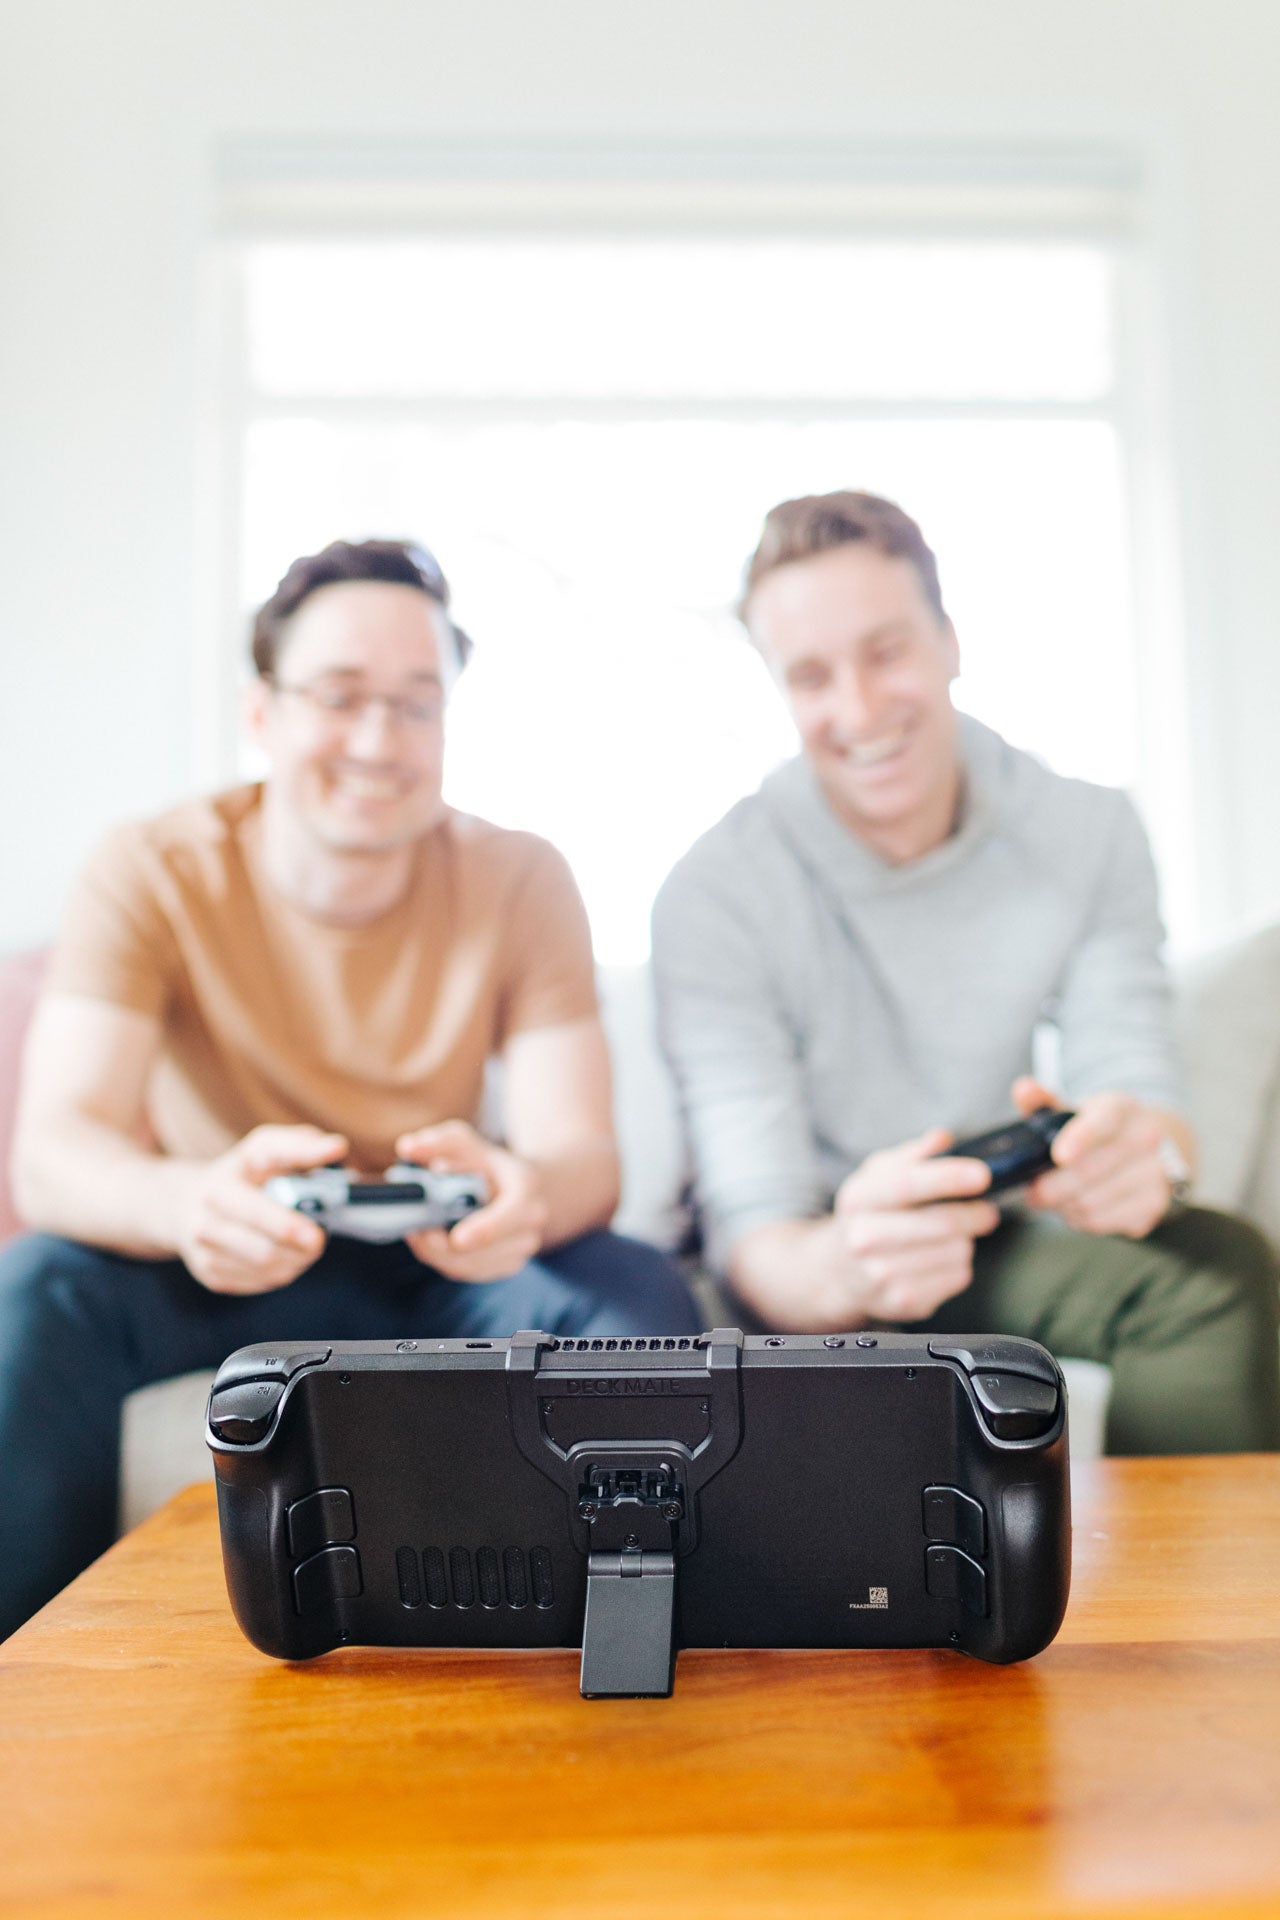 Friends play a game using controllers while their Steam Deck is propped on a table using the Steam Deck Accessory Deckmate Grip and Kickstand